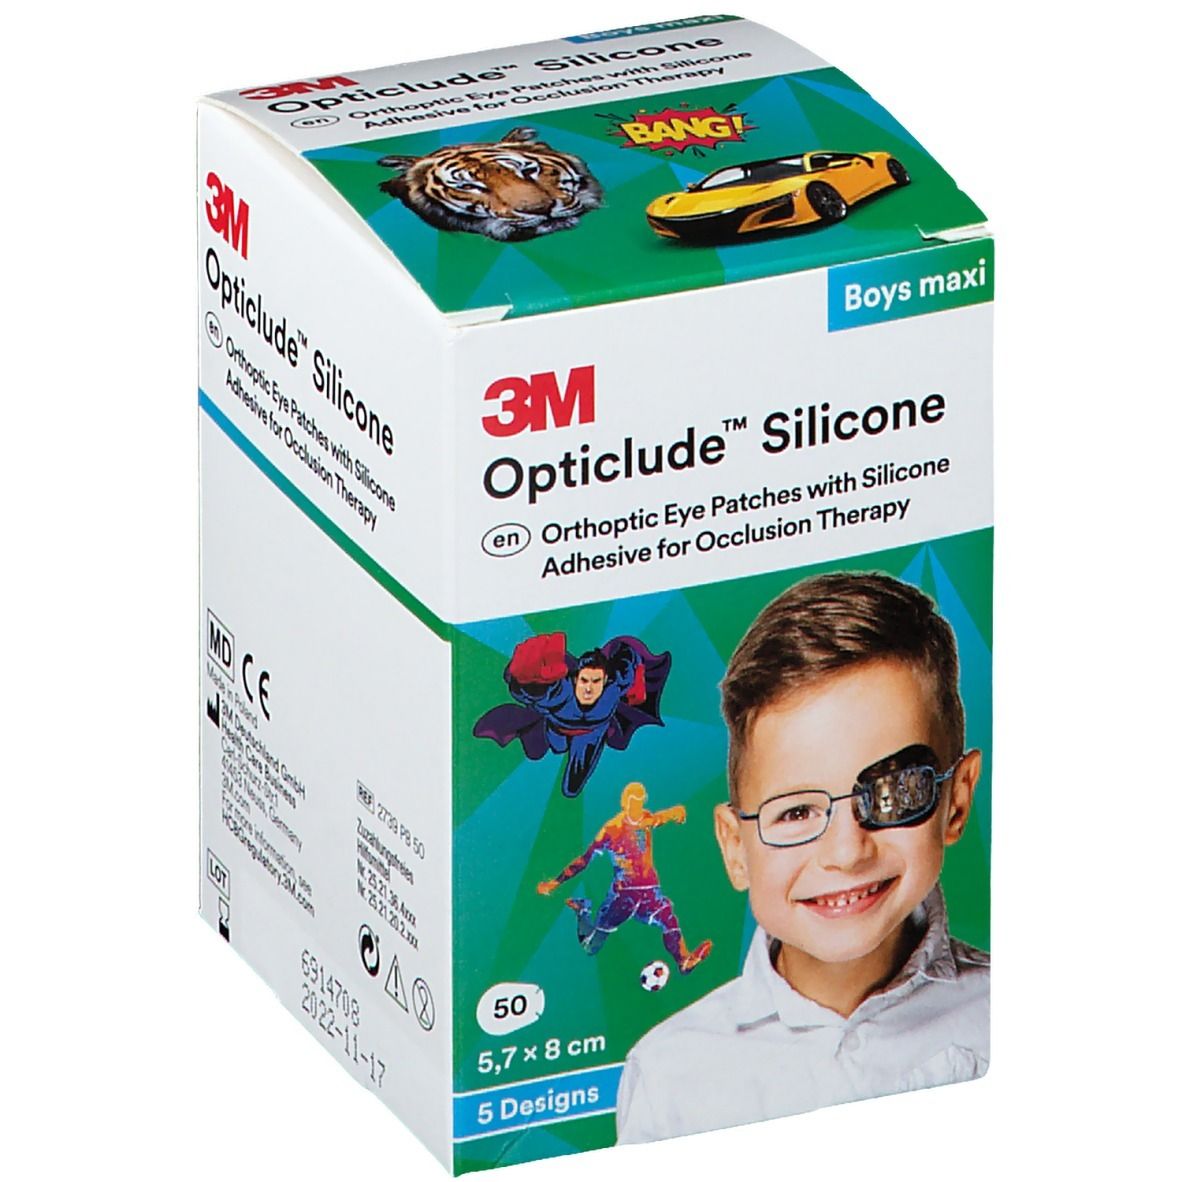 Image of 3M Opticlude™ Silicone Boys maxi Augenpflaster 5,7 x 8 cm